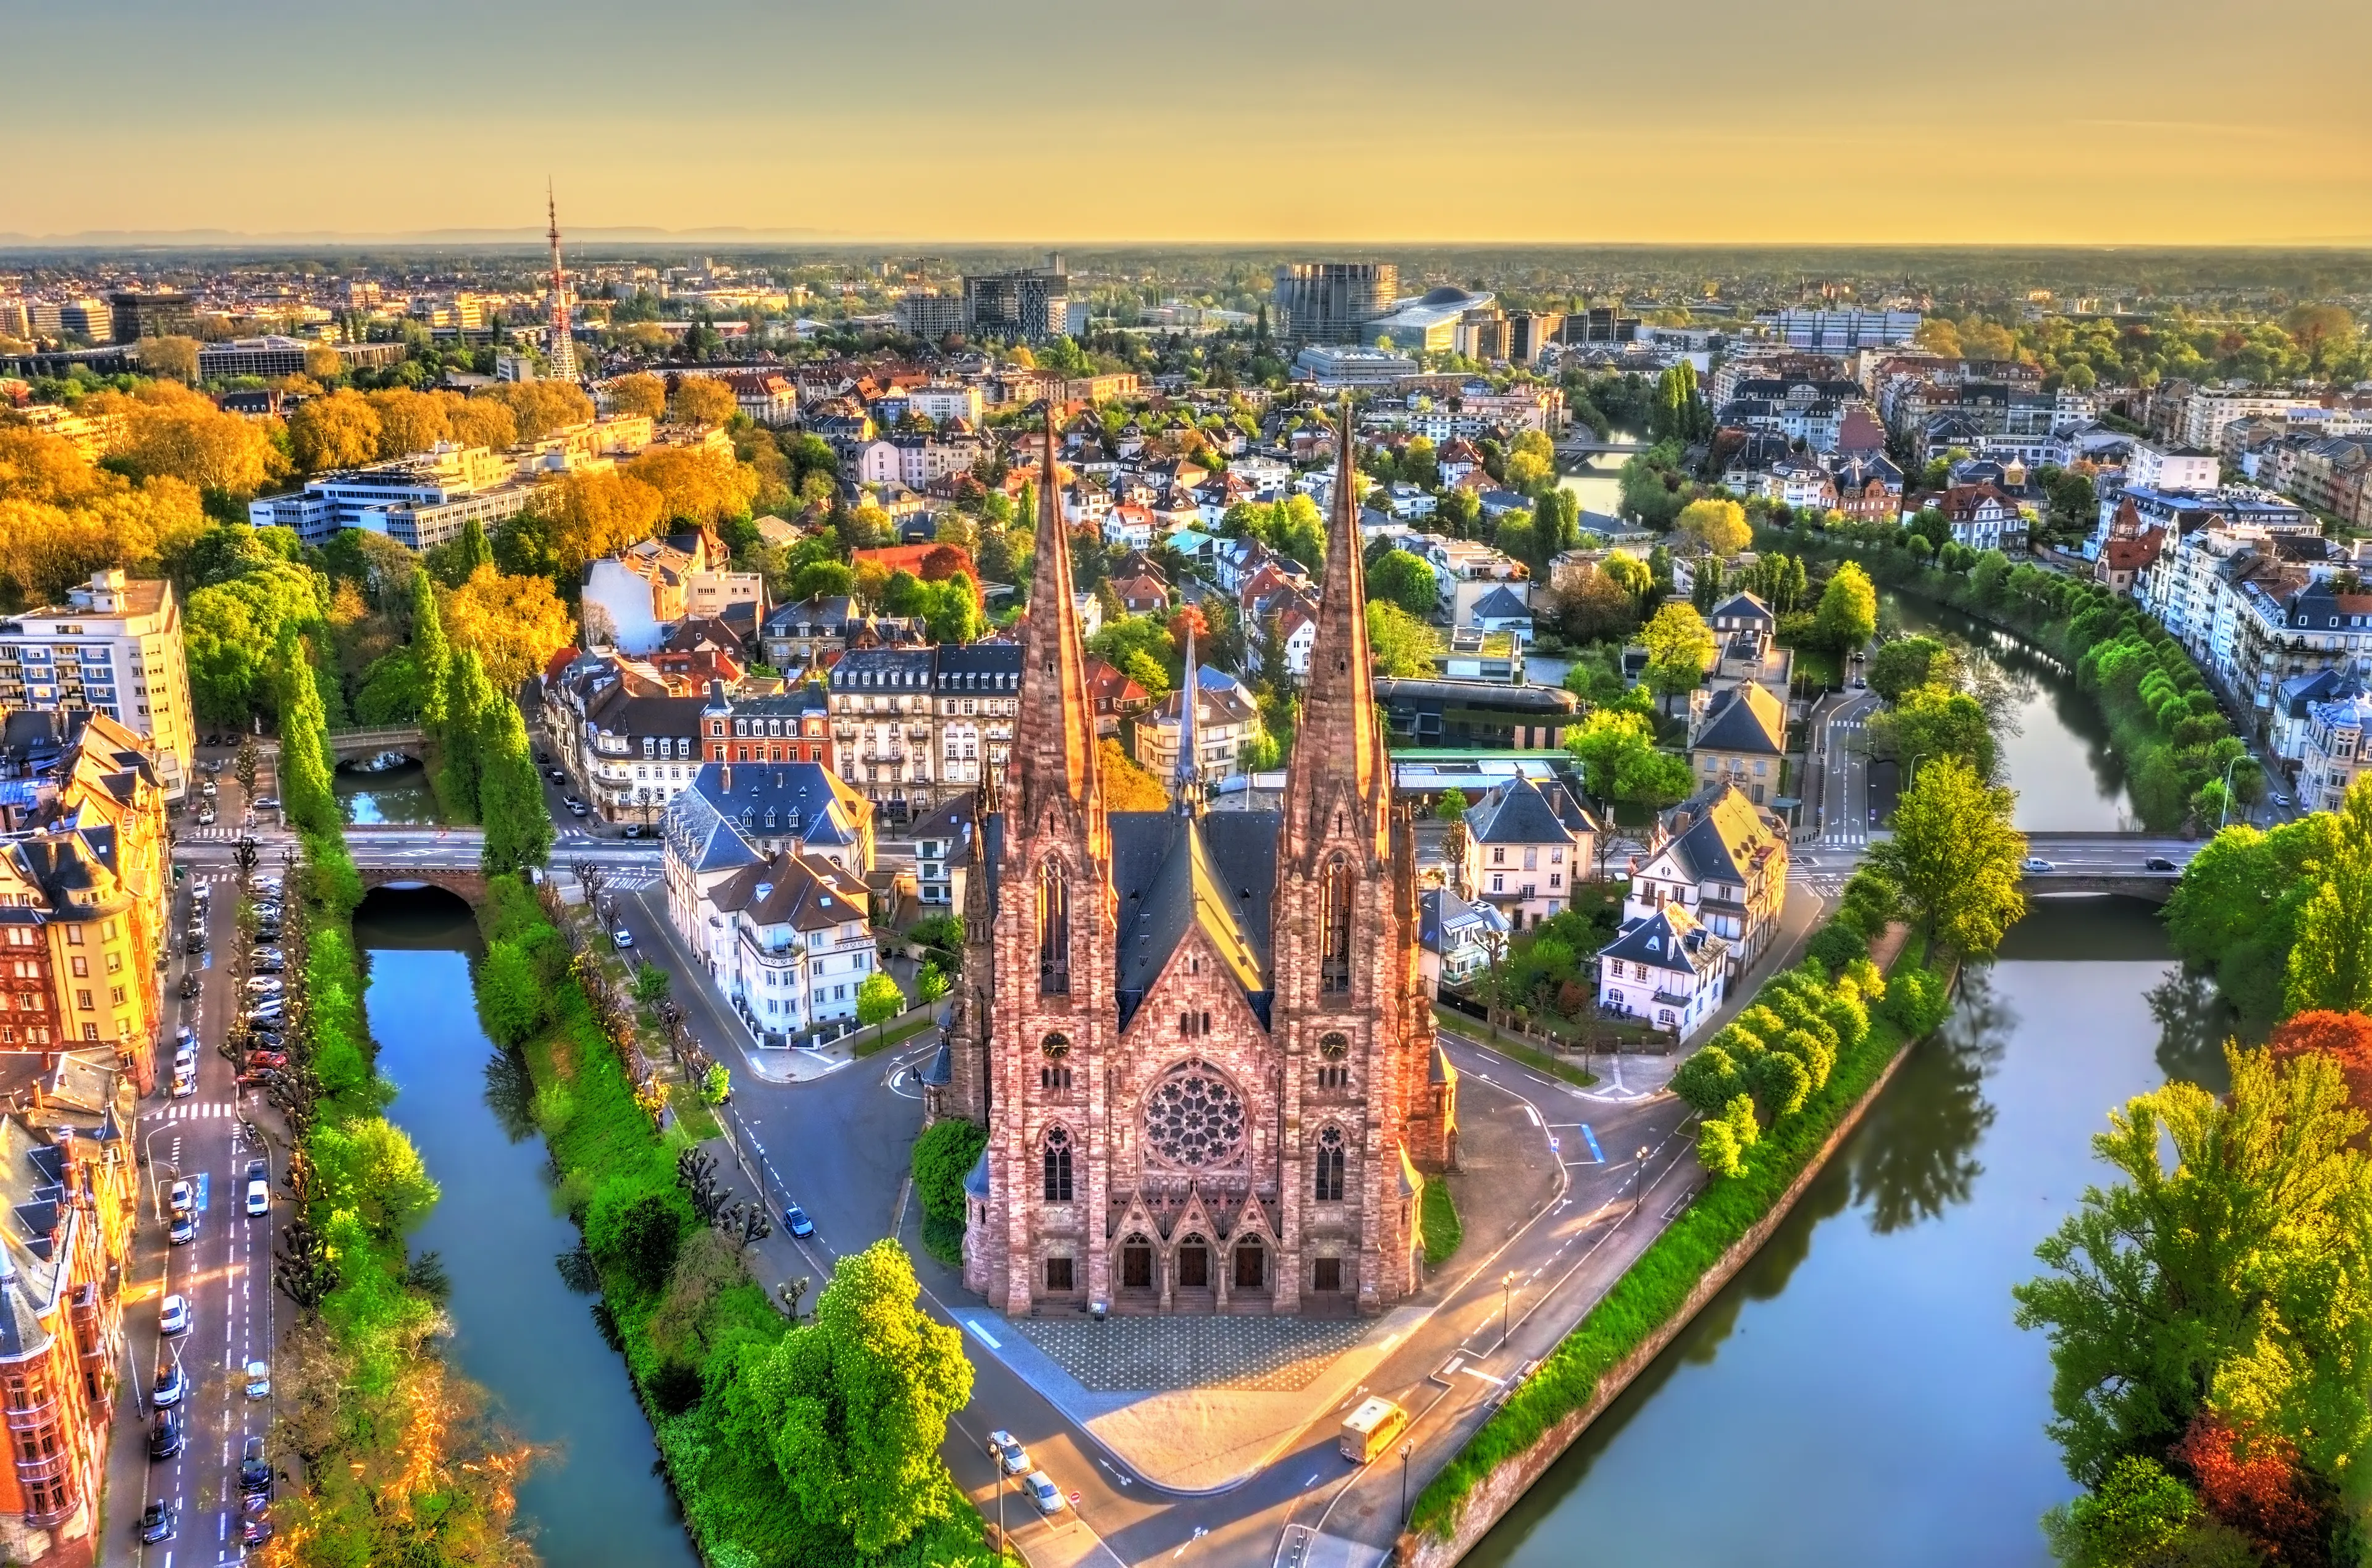 2-Day Family Adventure & Sightseeing in Strasbourg, France